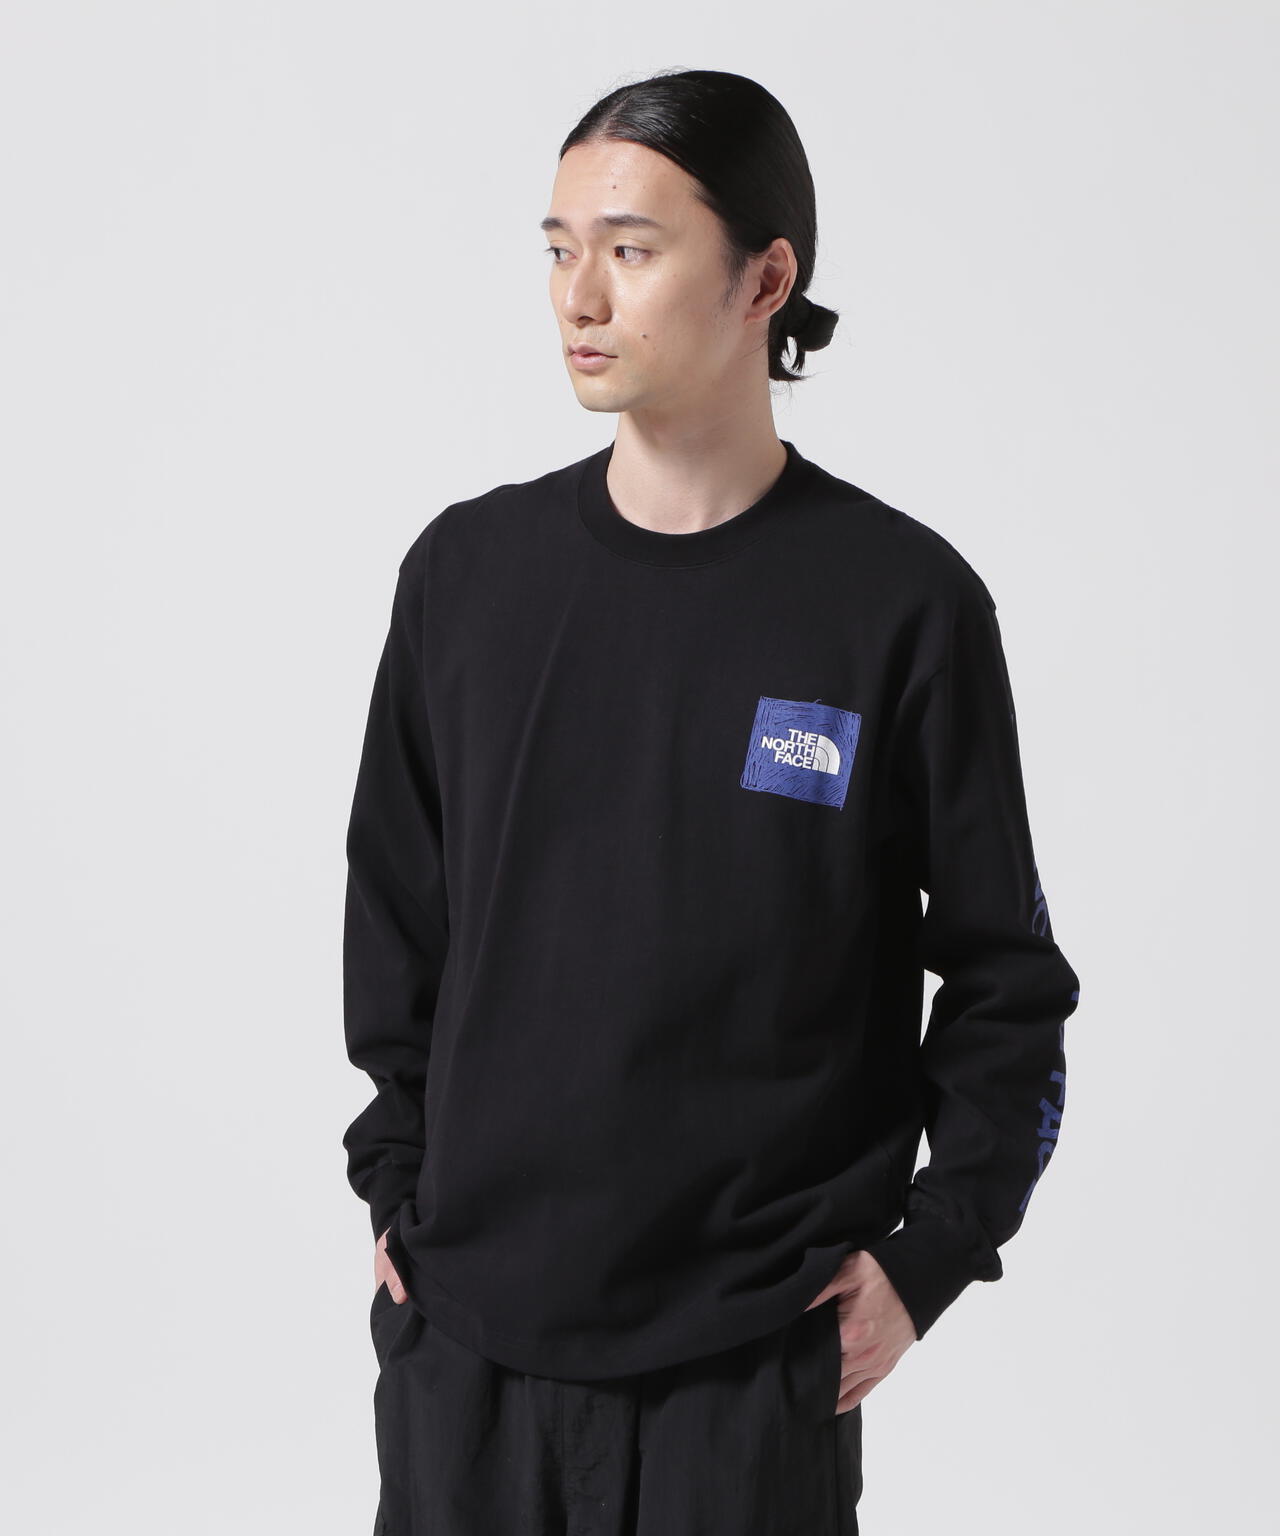 THE NORTH FACE (ザ・ノースフェイス）L/S Sleeve Graphic Tee | B'2nd 